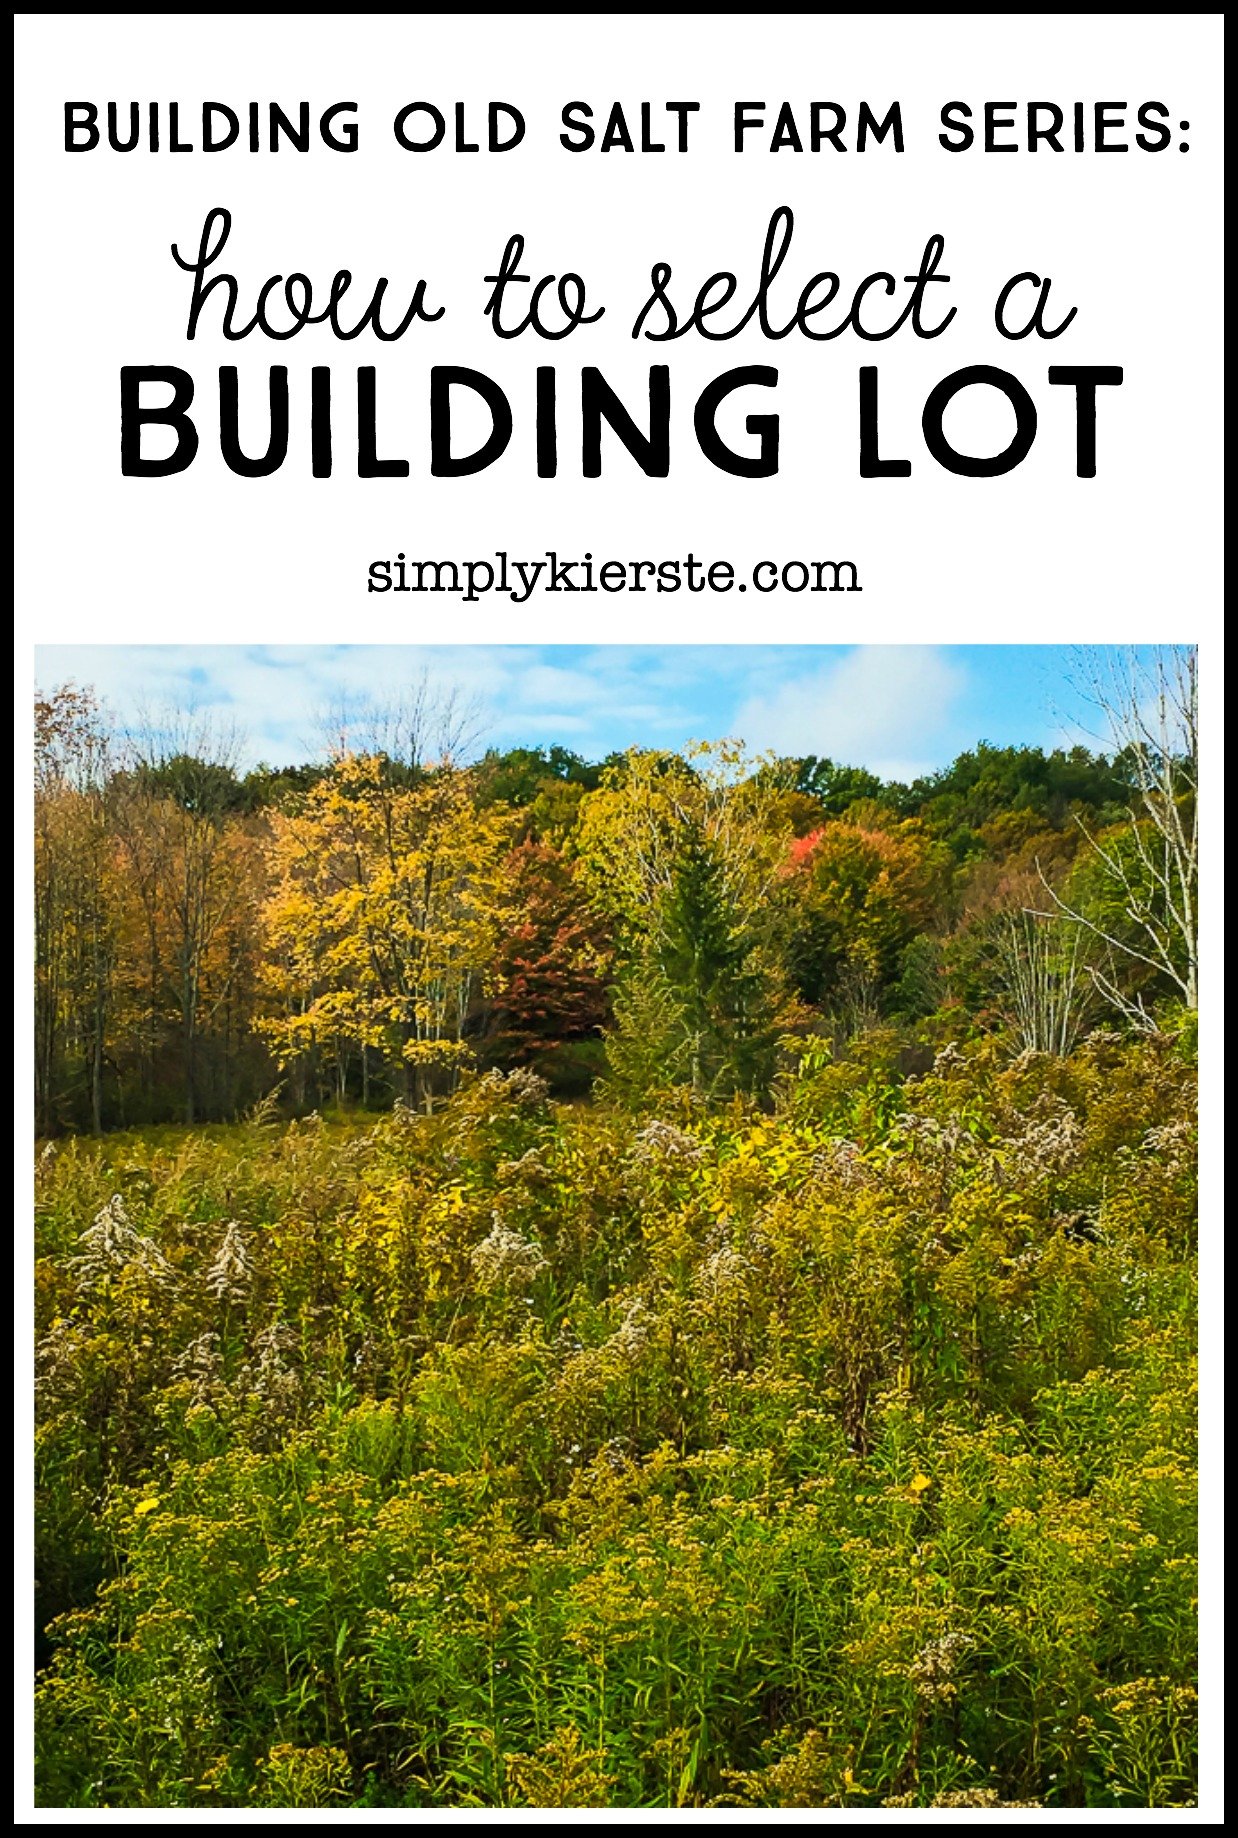 Building Old Salt Farm Series:  How to select a building lot